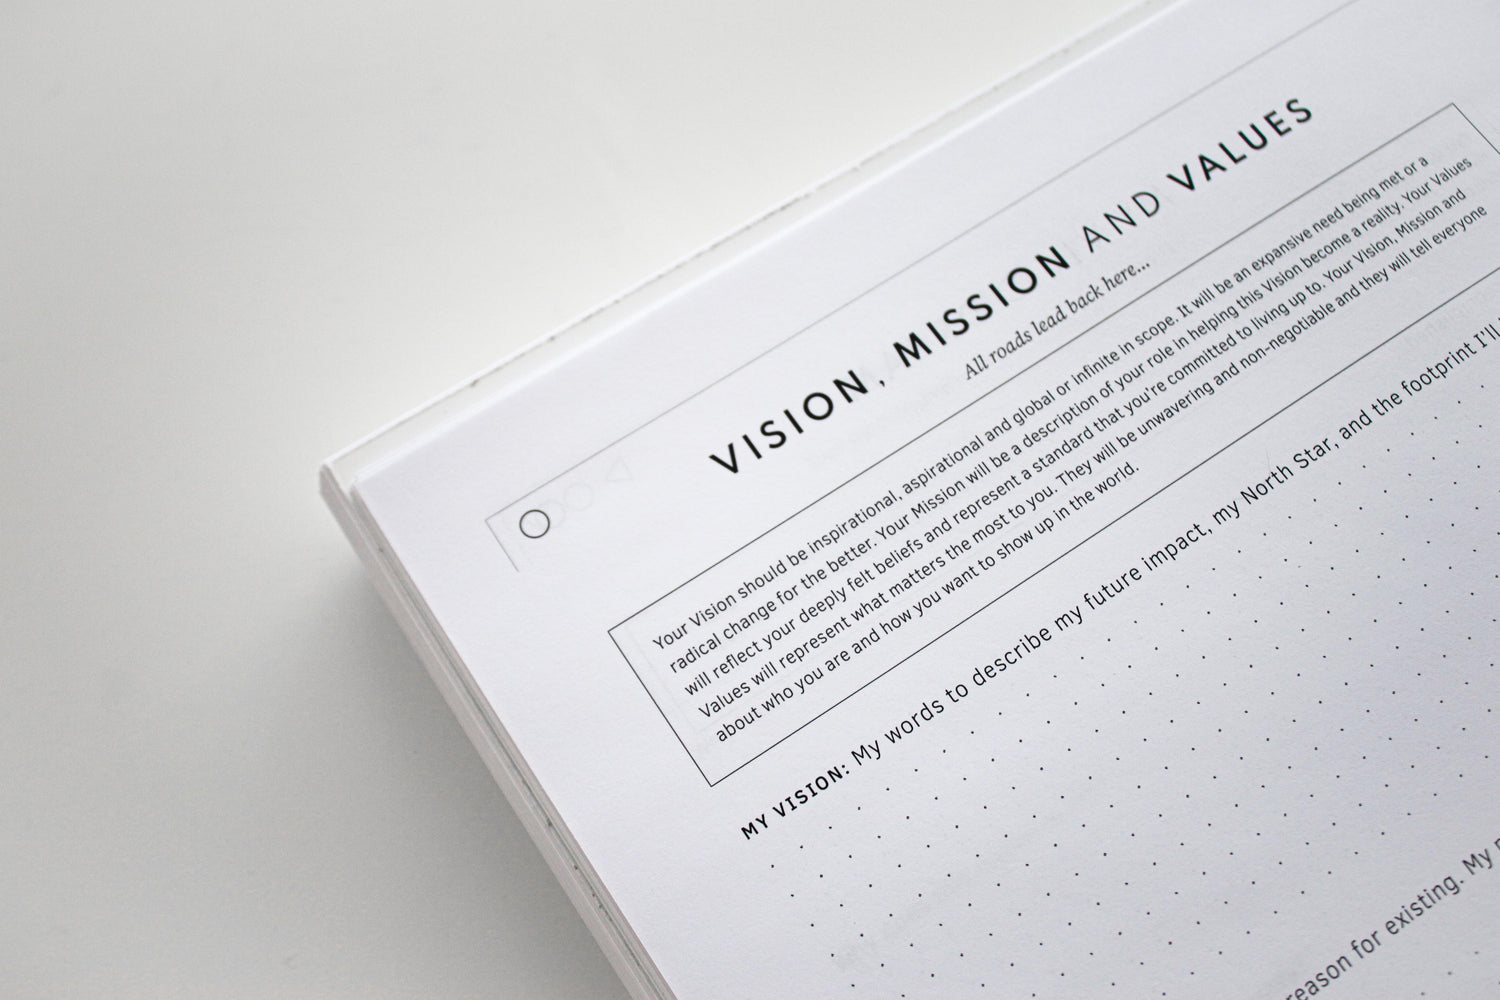 The ONE Book - Vision, Mission, and Values